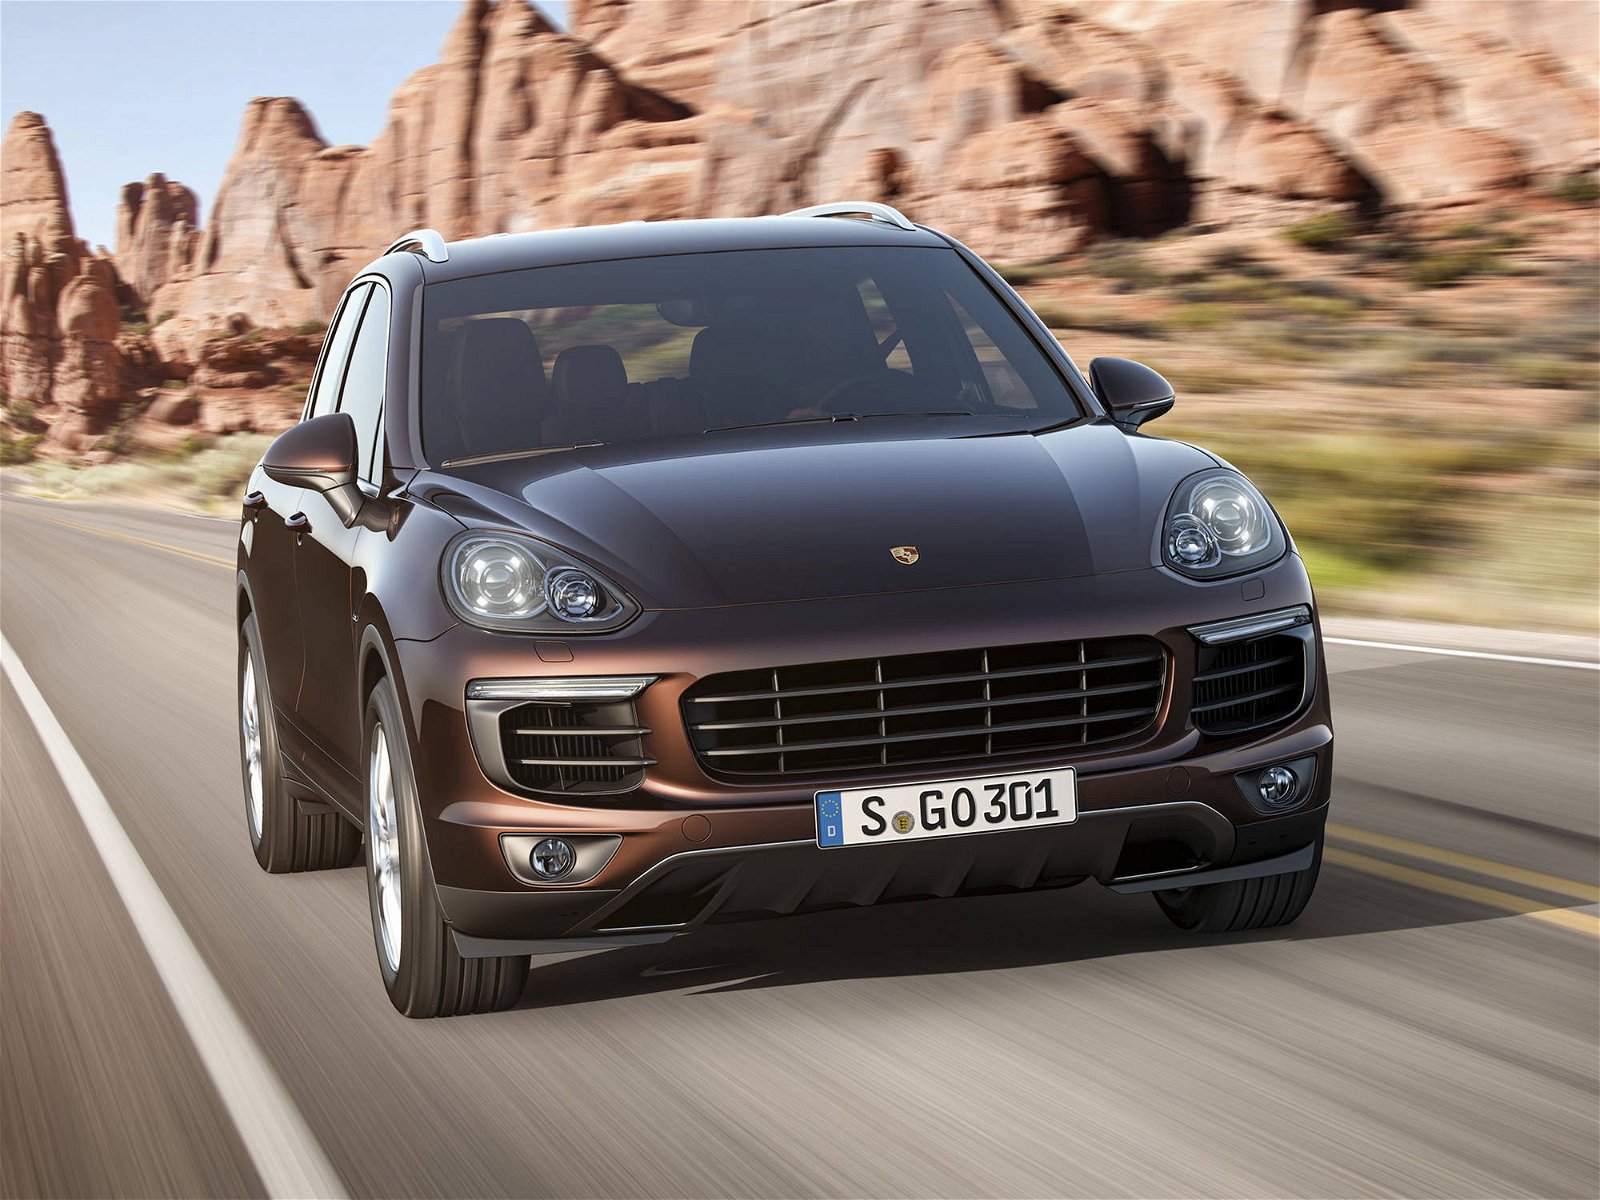 Porsche drops all diesel engines from its lineup